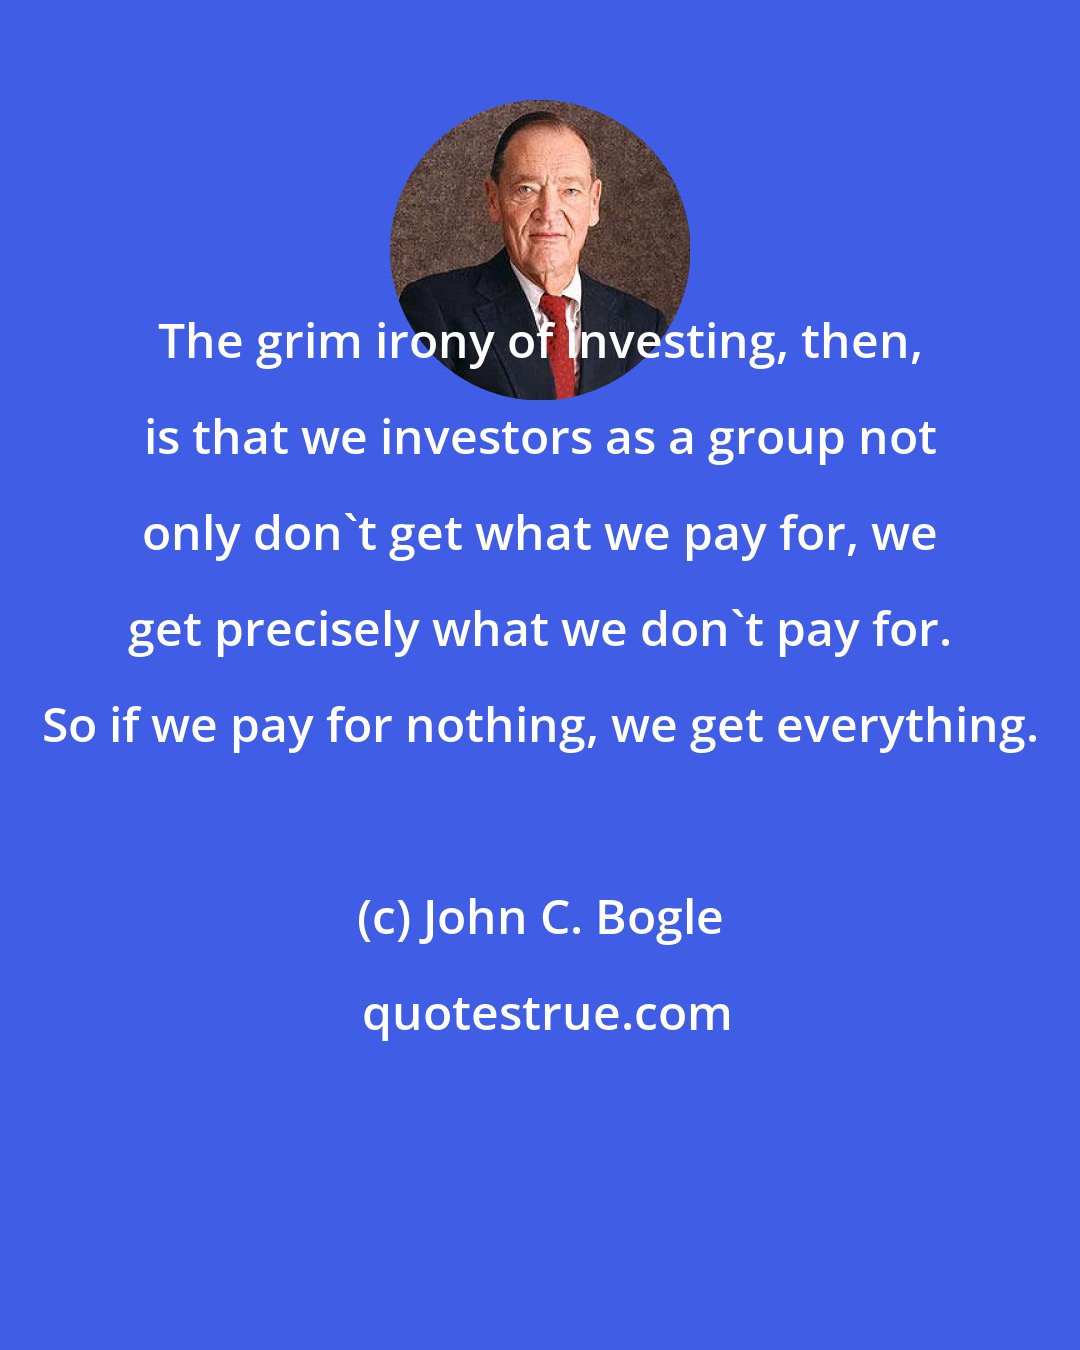 John C. Bogle: The grim irony of investing, then, is that we investors as a group not only don't get what we pay for, we get precisely what we don't pay for. So if we pay for nothing, we get everything.